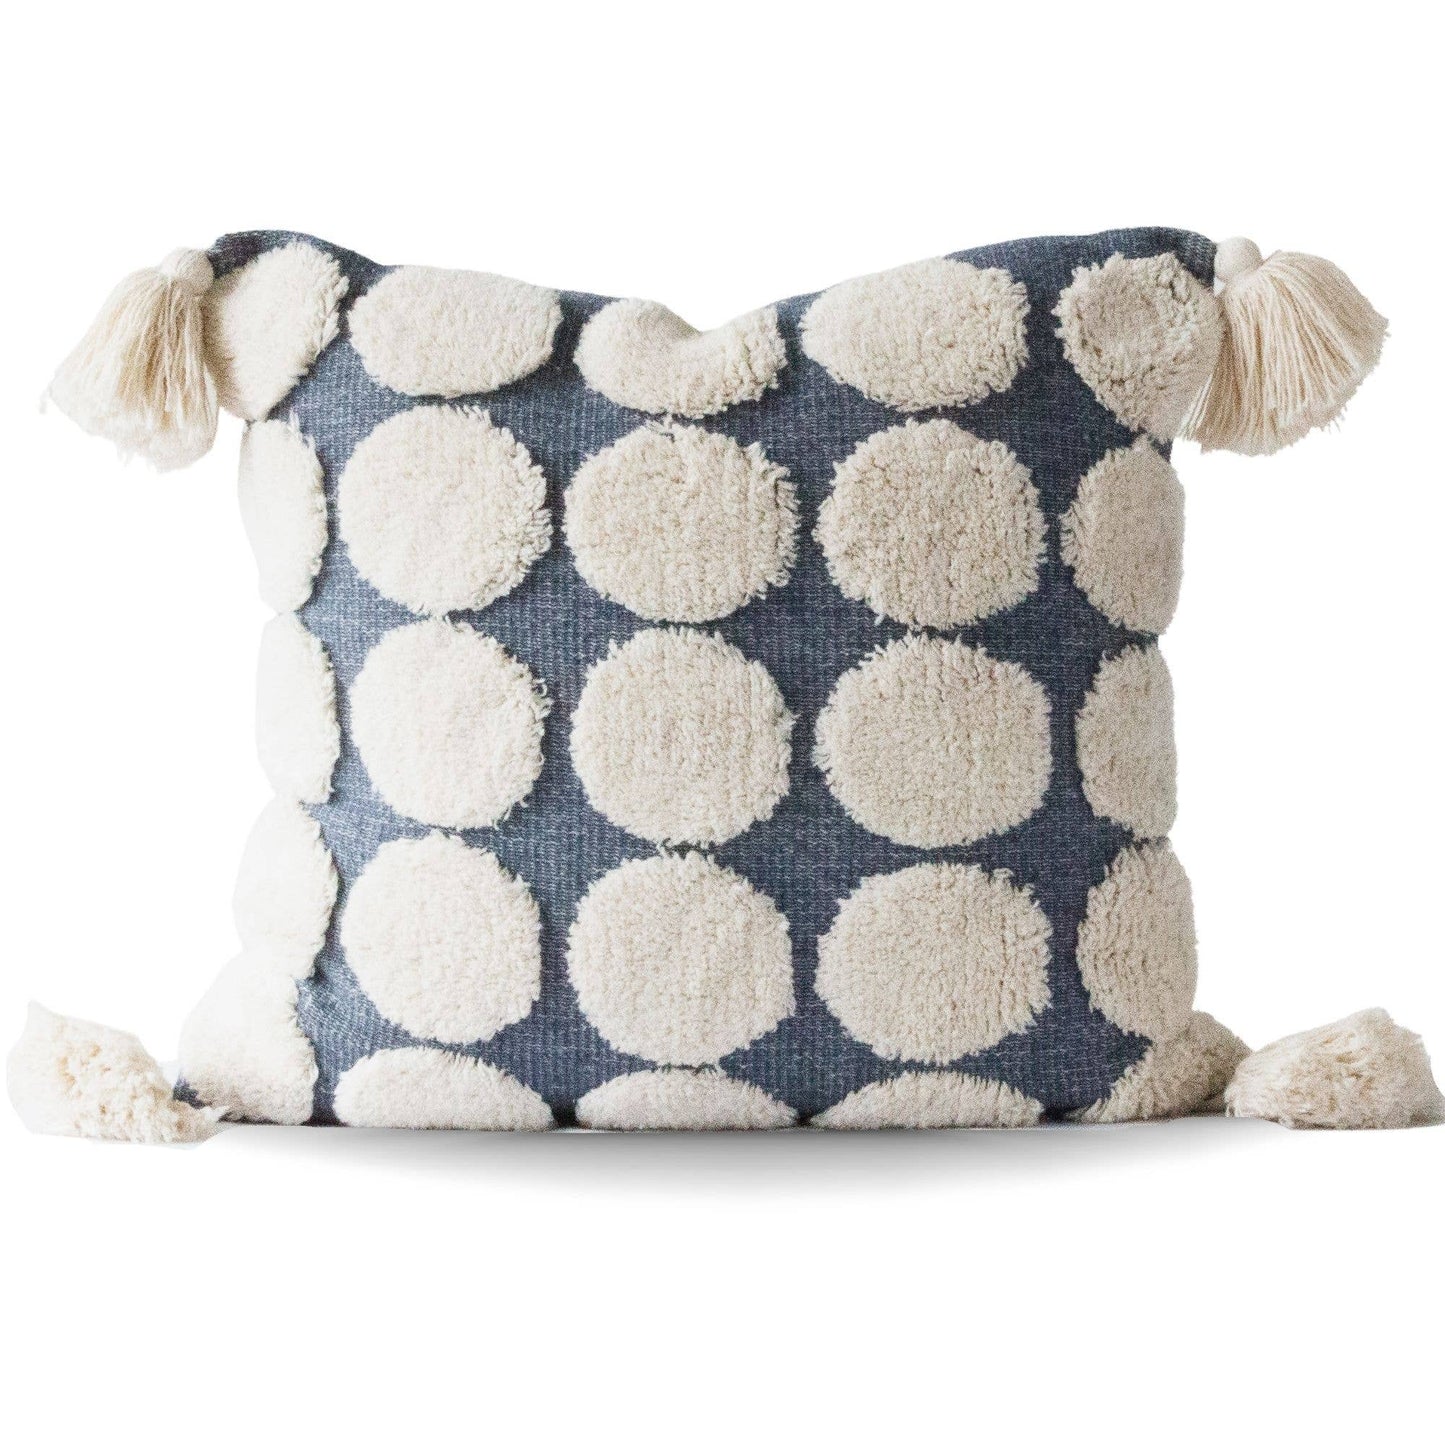 Load image into Gallery viewer, Polka Dot Tufted Cotton Pillow Cover - Curated Home Decor
